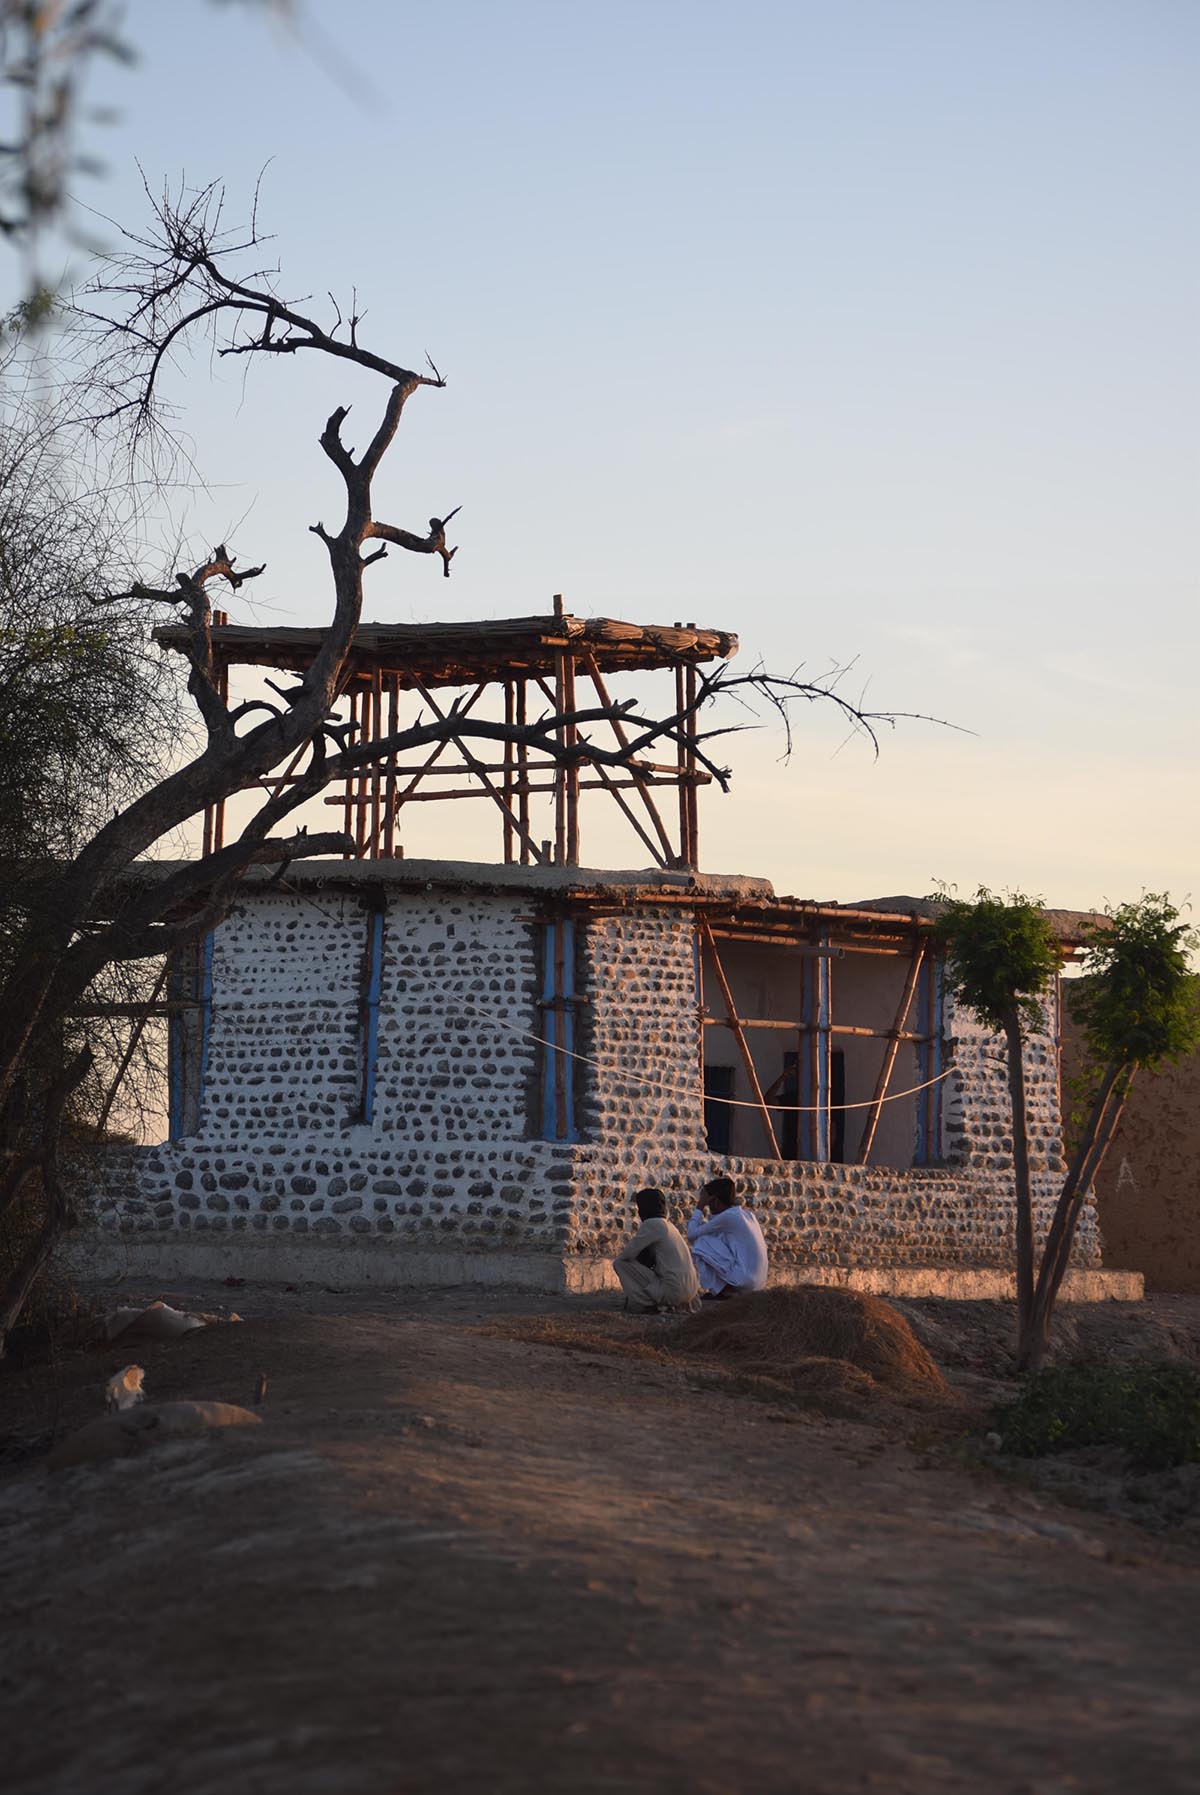 Tranquil Abode: A Disaster Resilient Dwelling by WM Re-Lab for Bahaal Pakistan, Baitussalam Welfare 